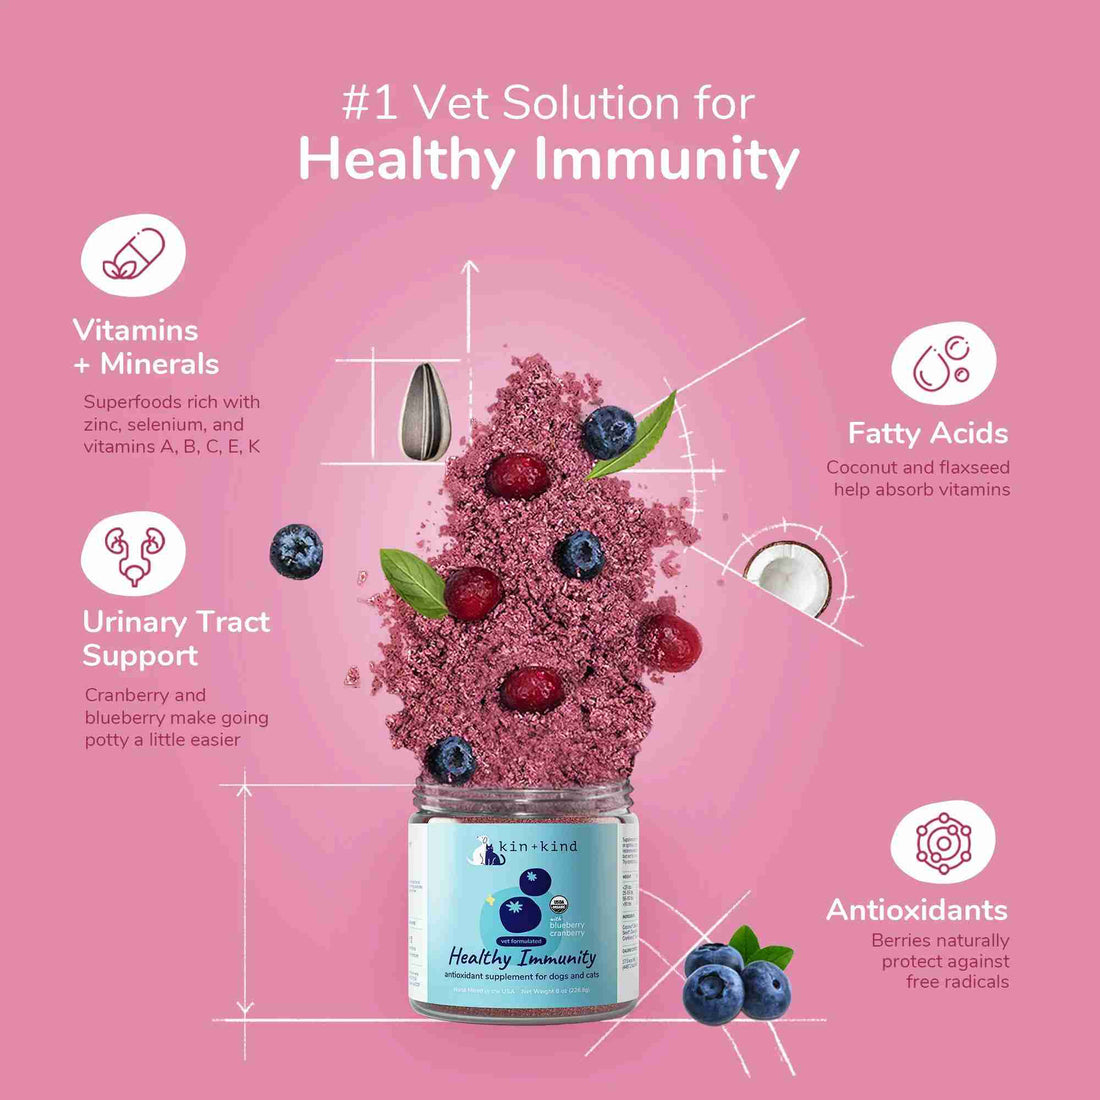 Healthy immunity antioixidant supplement for dogs and cats with blueberries and cranberries usda organic ingredient visual with benefits